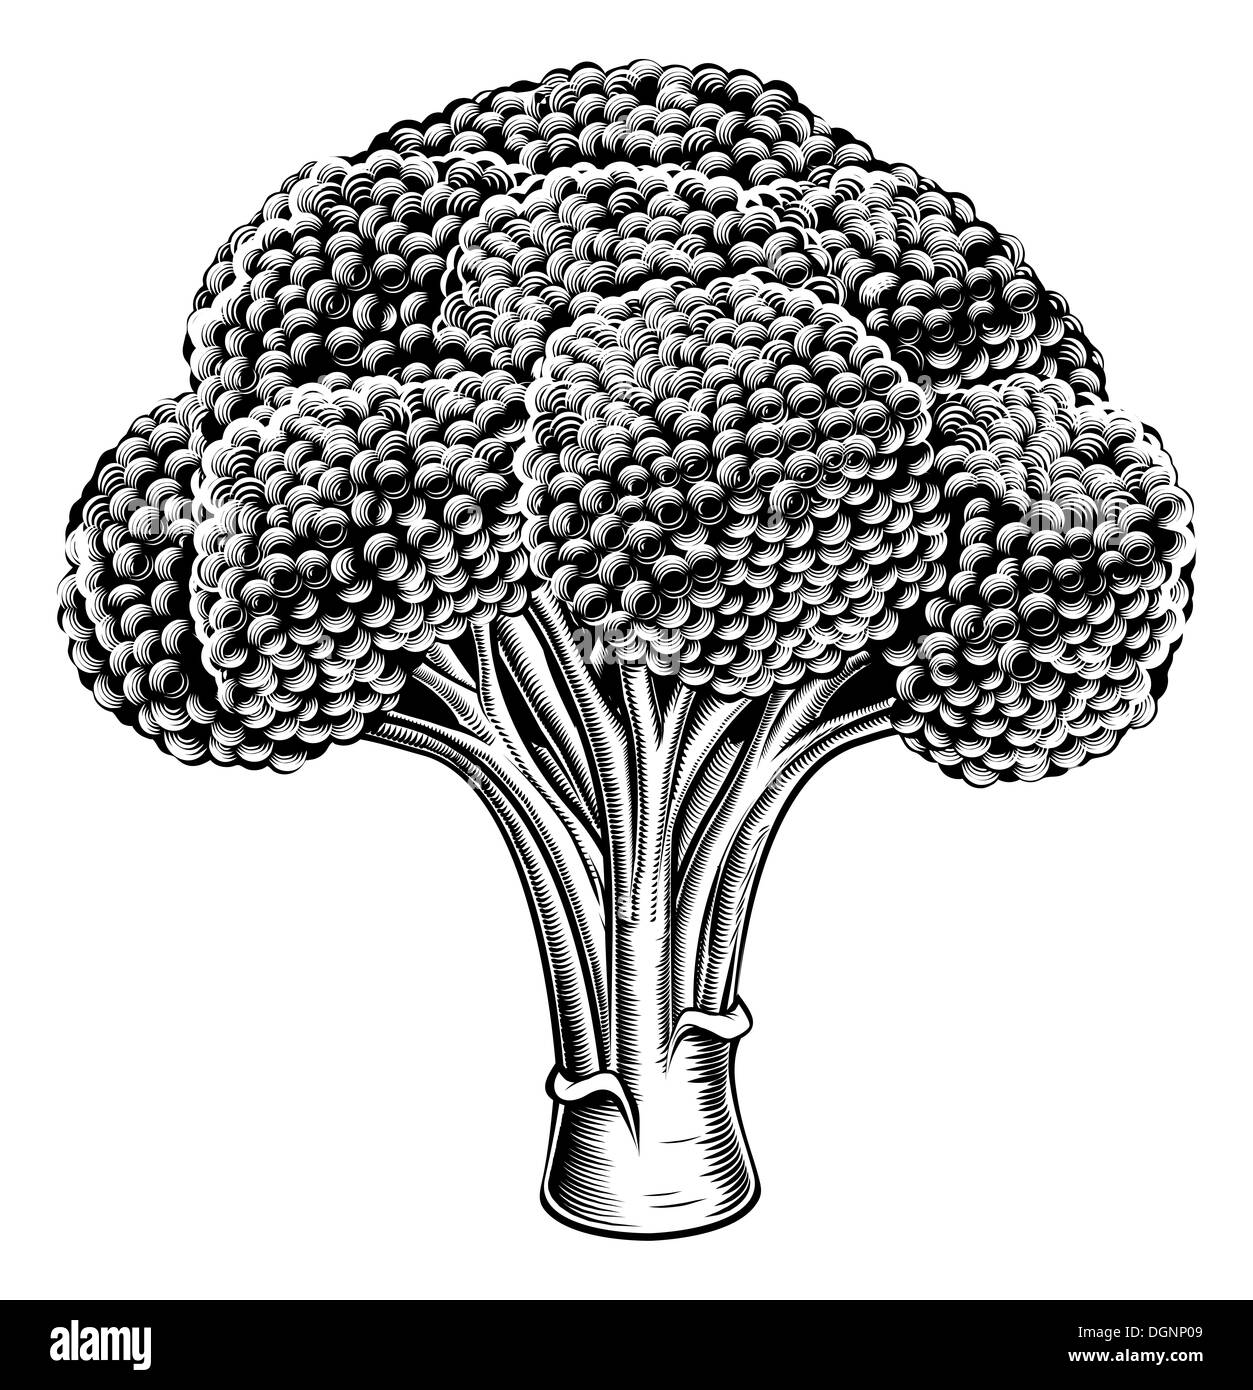 A vintage retro woodcut print or etching style broccoli illustration Stock Photo